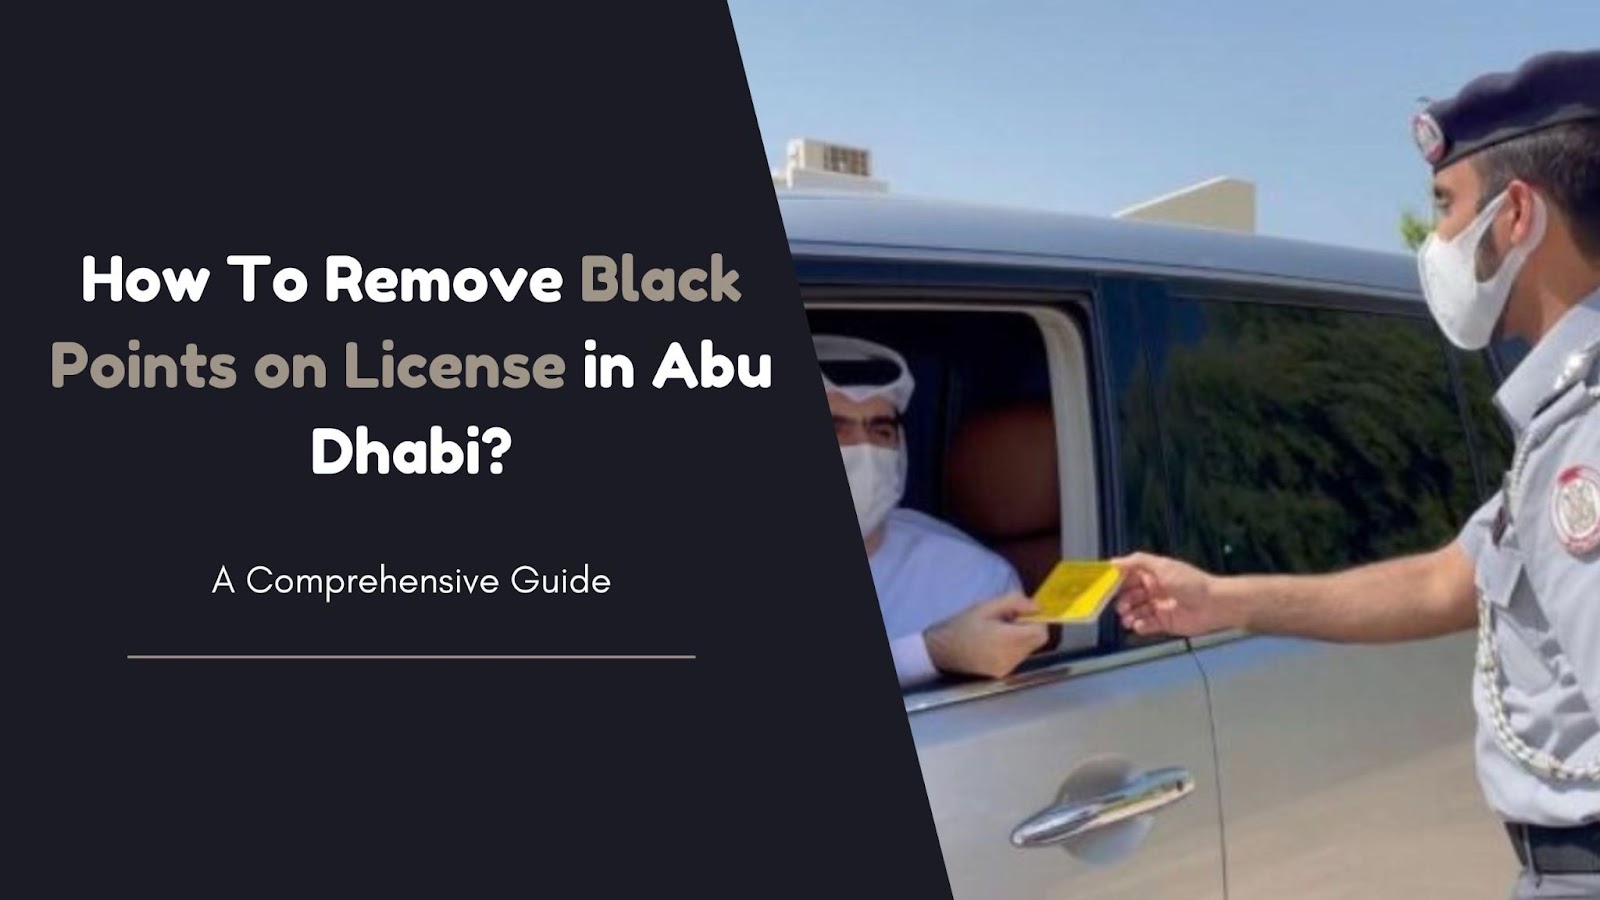 How To Remove Black Points on License in Abu Dhabi